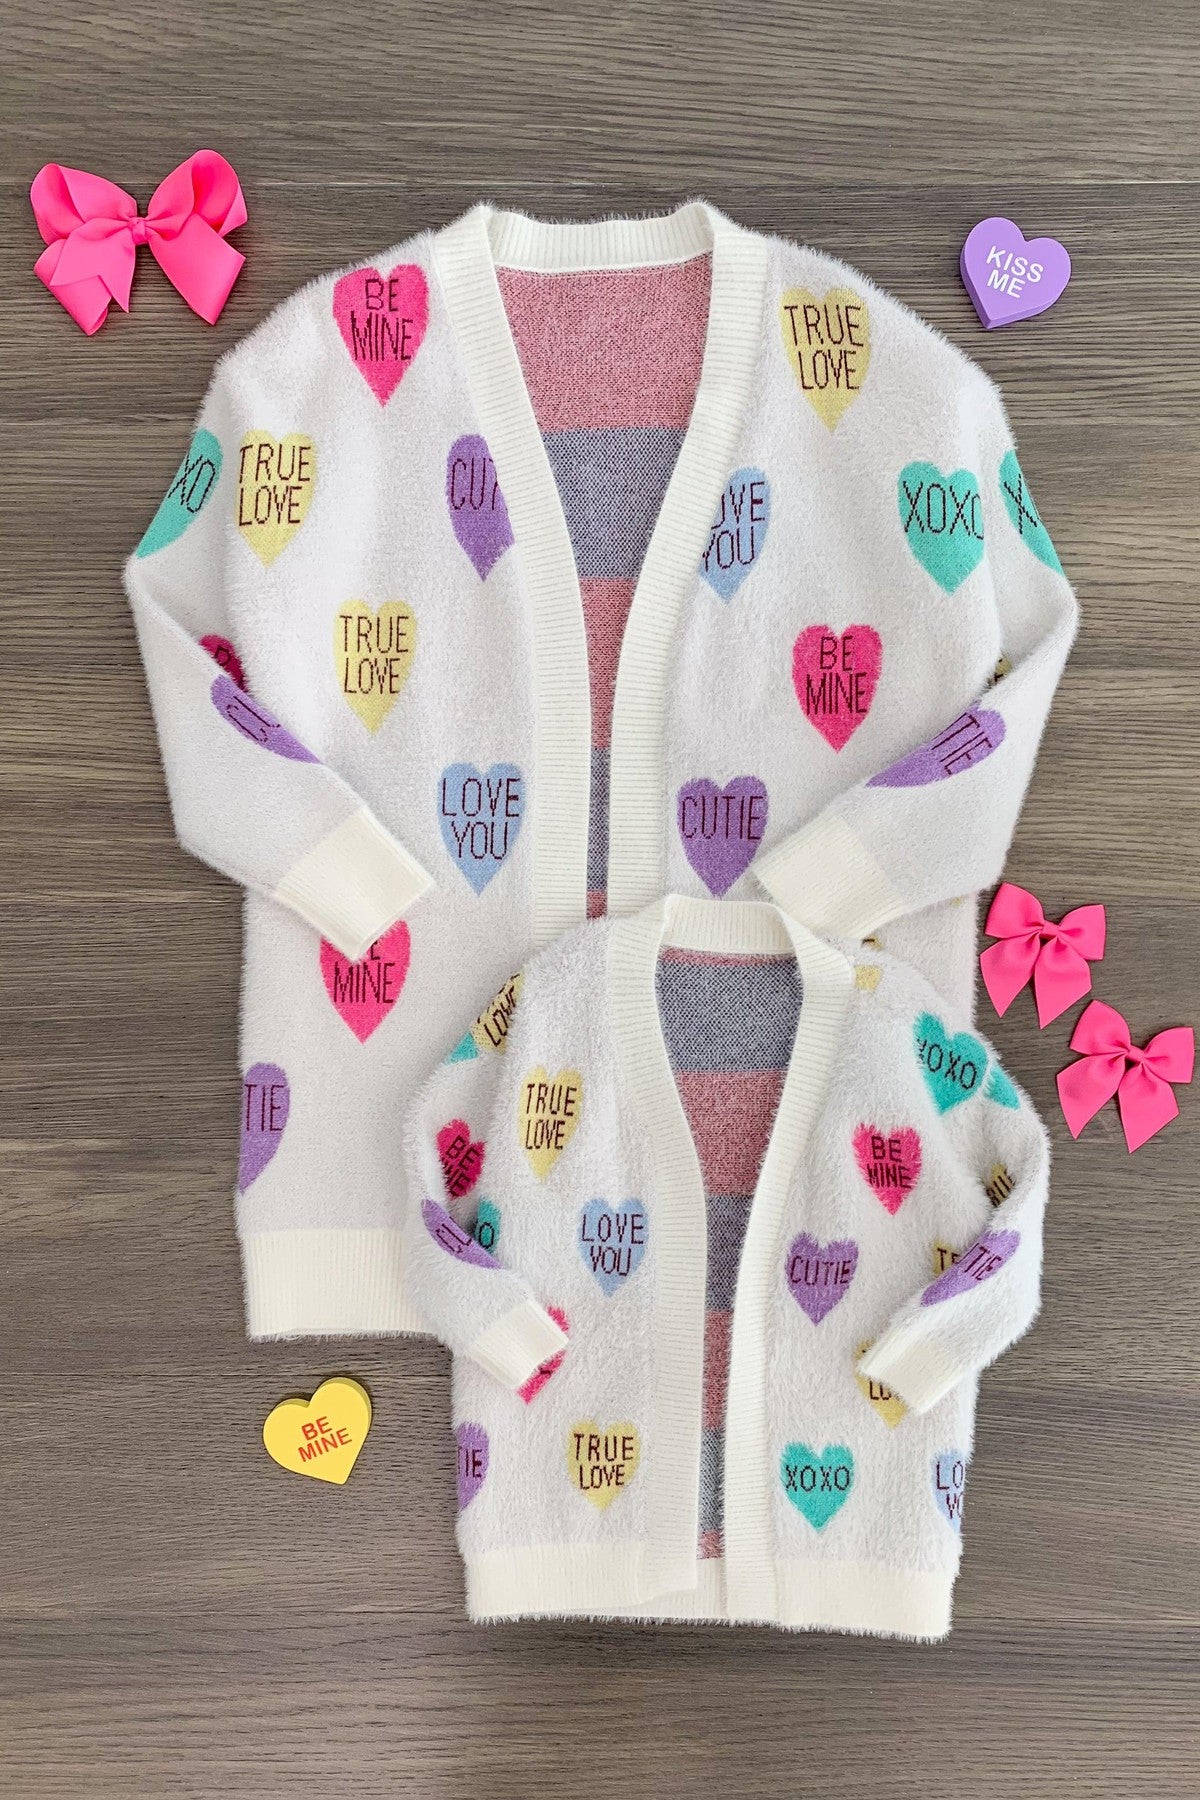 Mom & Me - Candy Hearts Cardigan - Sparkle in Pink